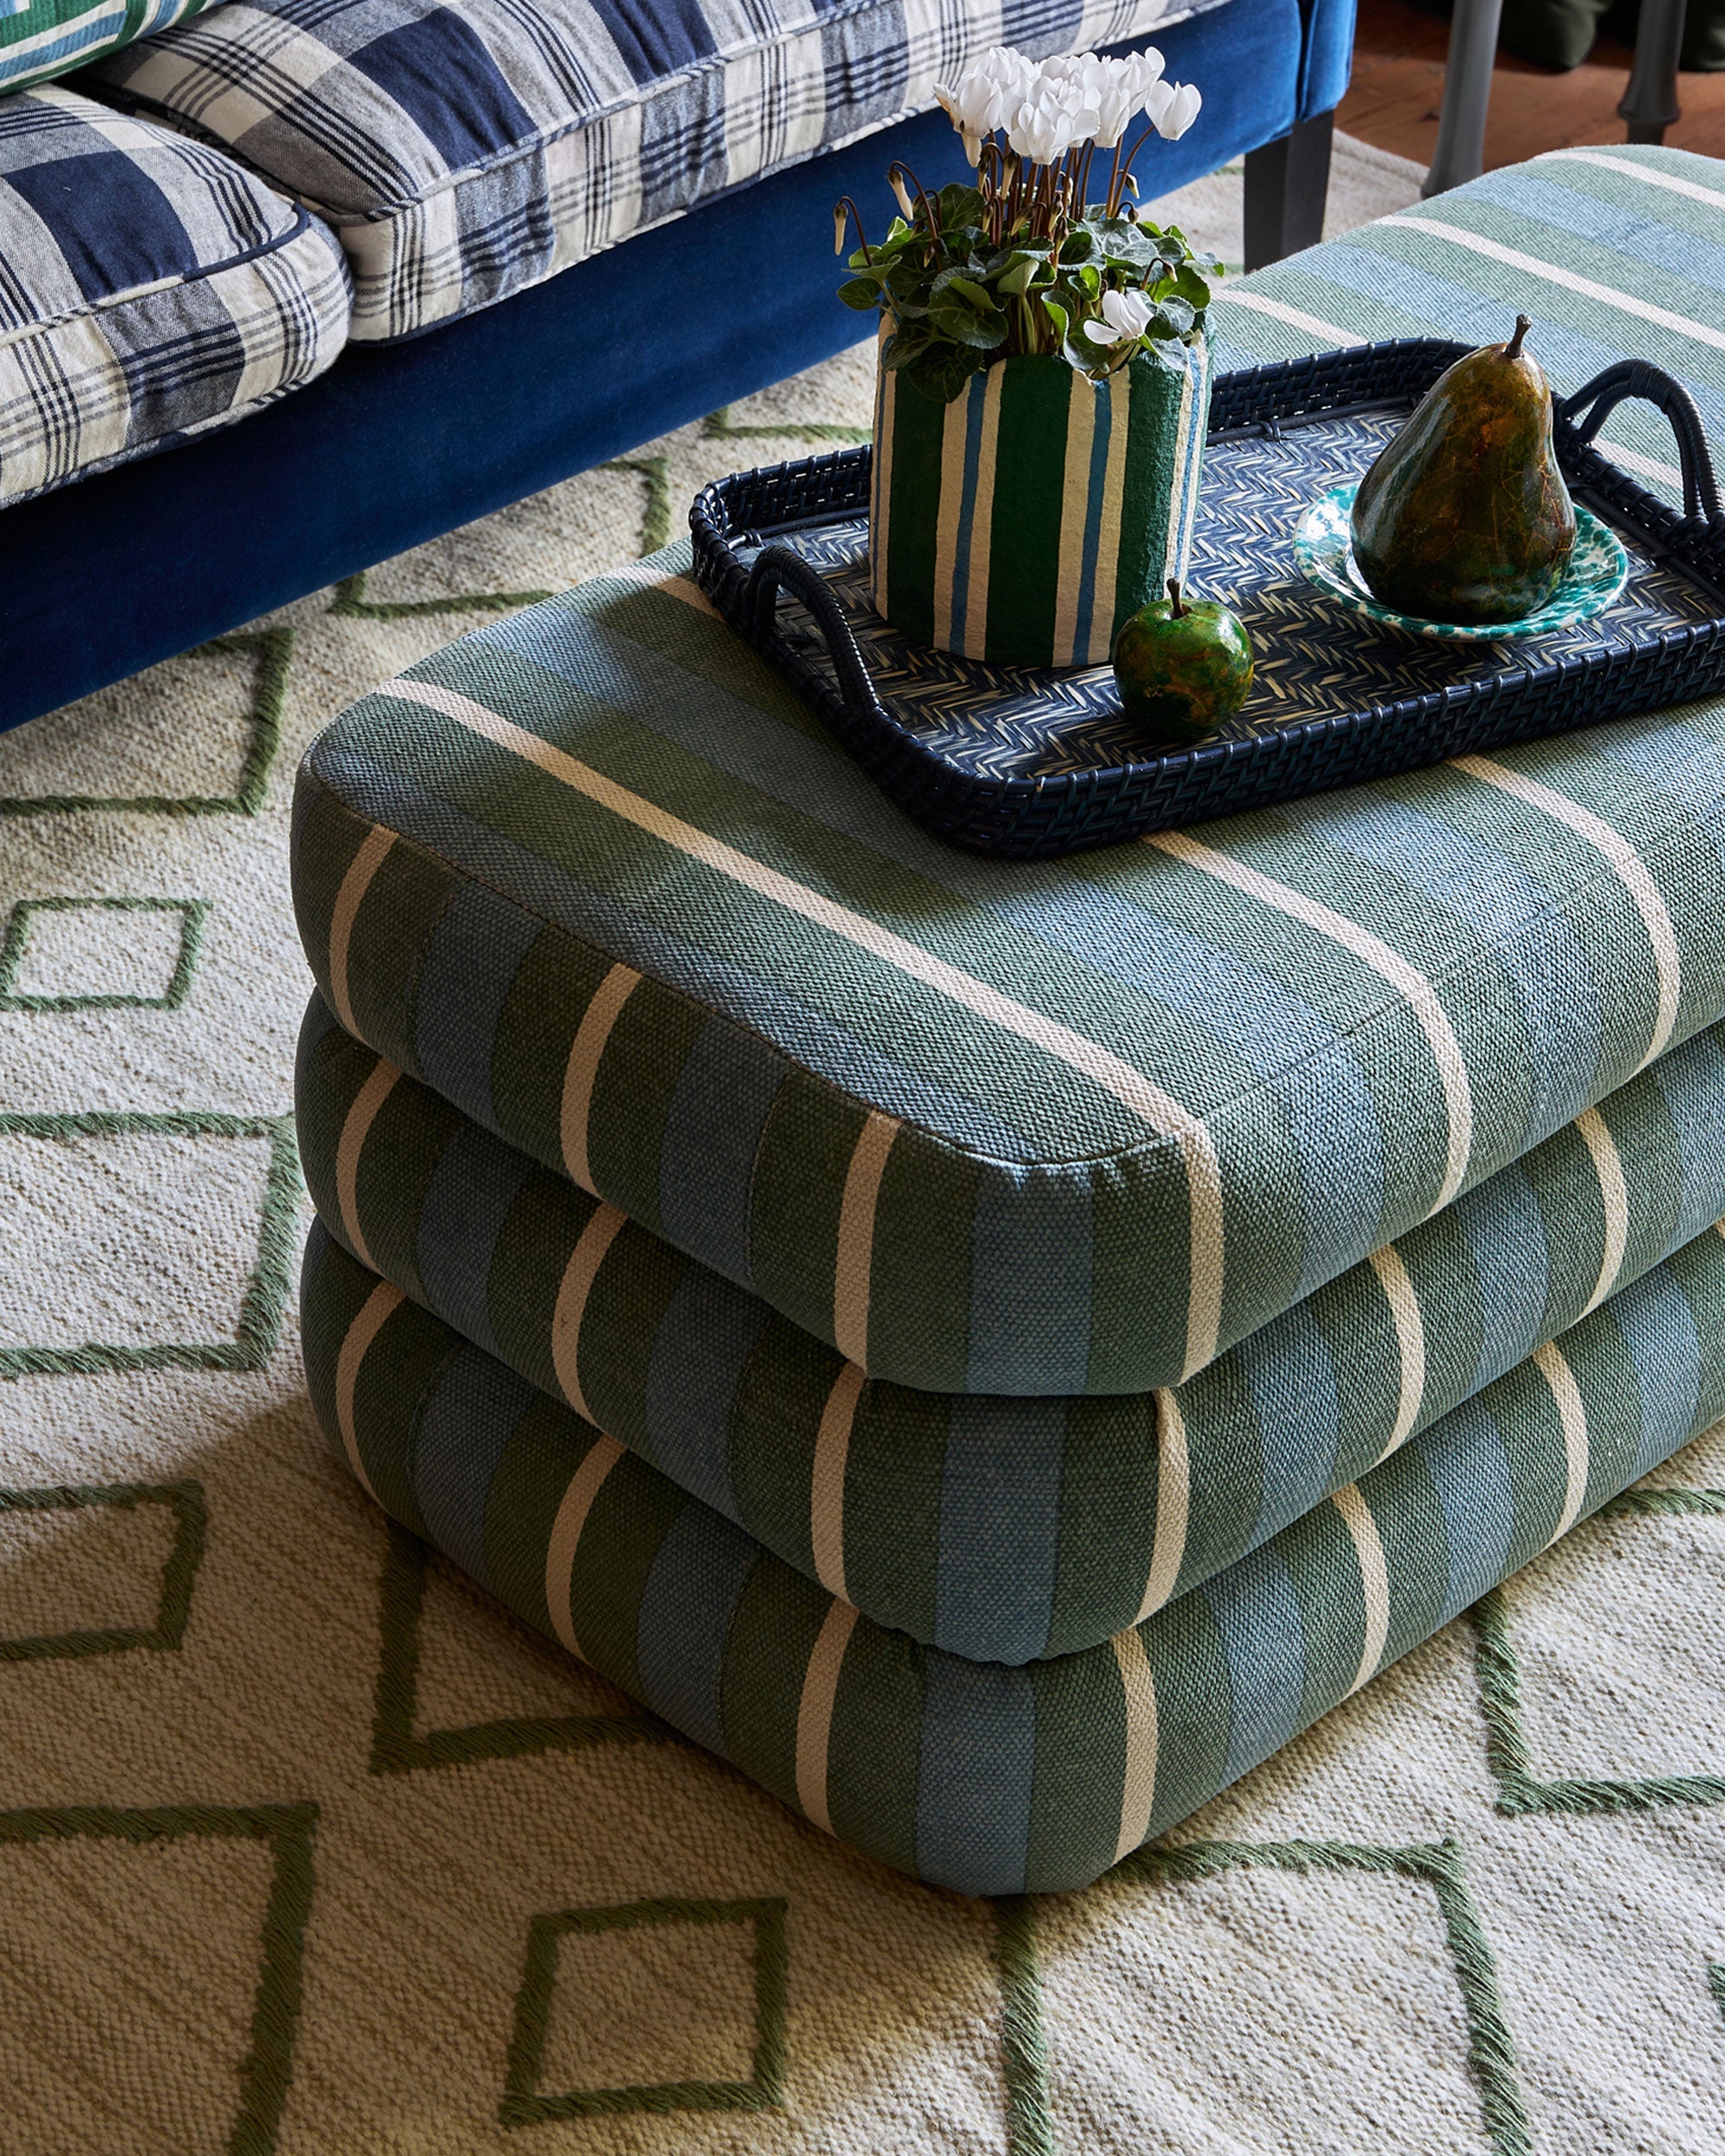 The Stripey Ottoman - The Blue and Green